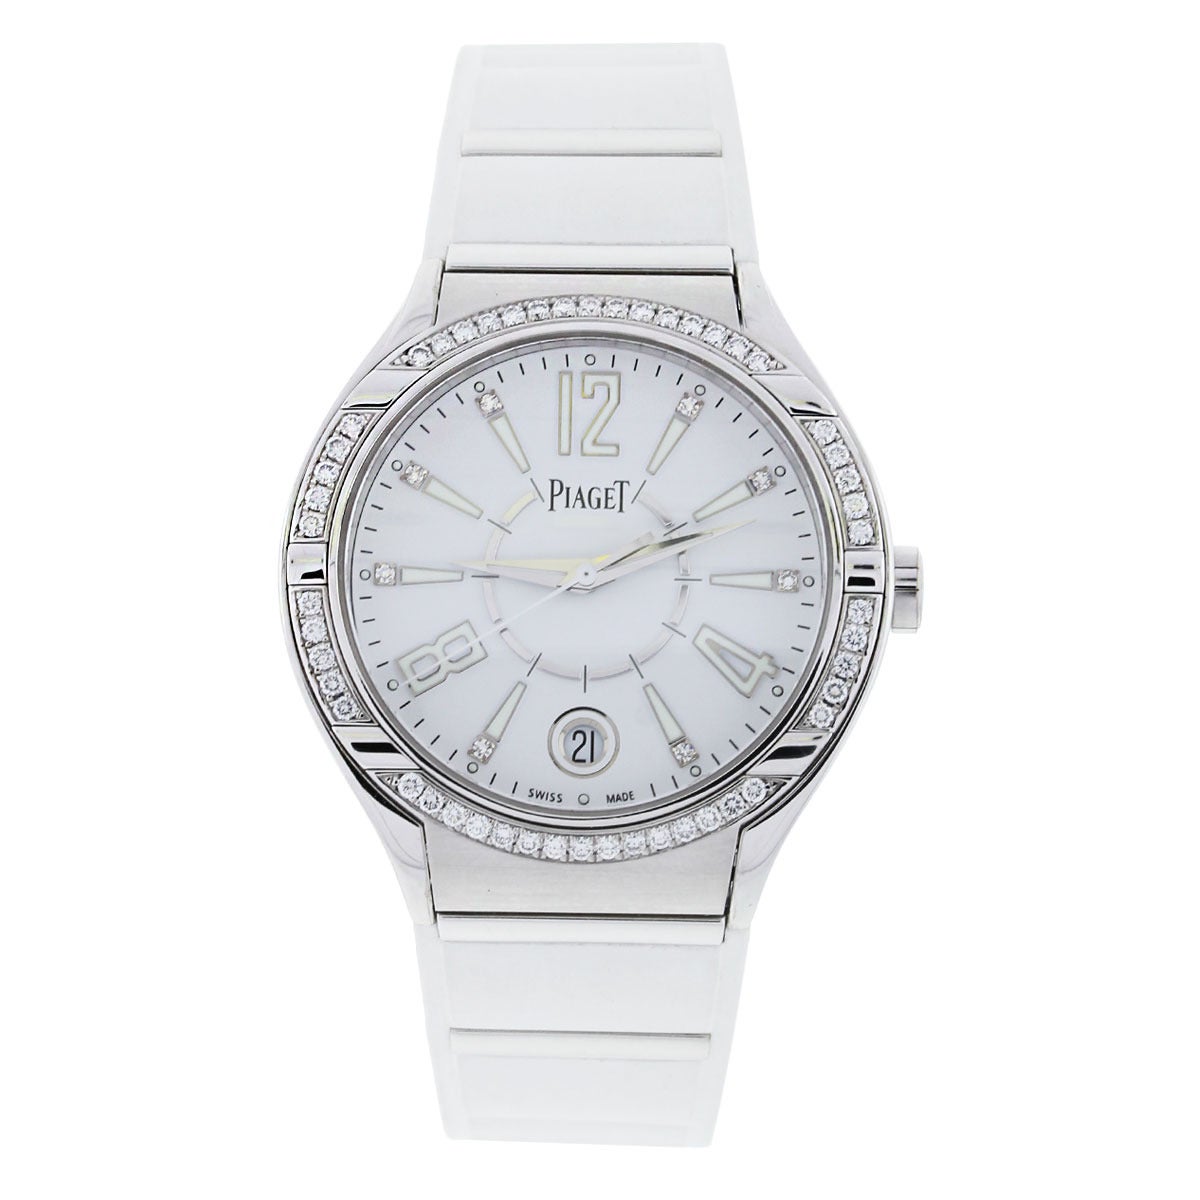 Brand: Piaget
Model: Polo FortyFive
Case Material: 18k White Gold
Movement: Quartz
Case Measurement: 38mm
Dial: White dial with luminescent markers in 18k white gold factory set with 8 brilliant cut diamonds approximately .05ct 
Crystal: